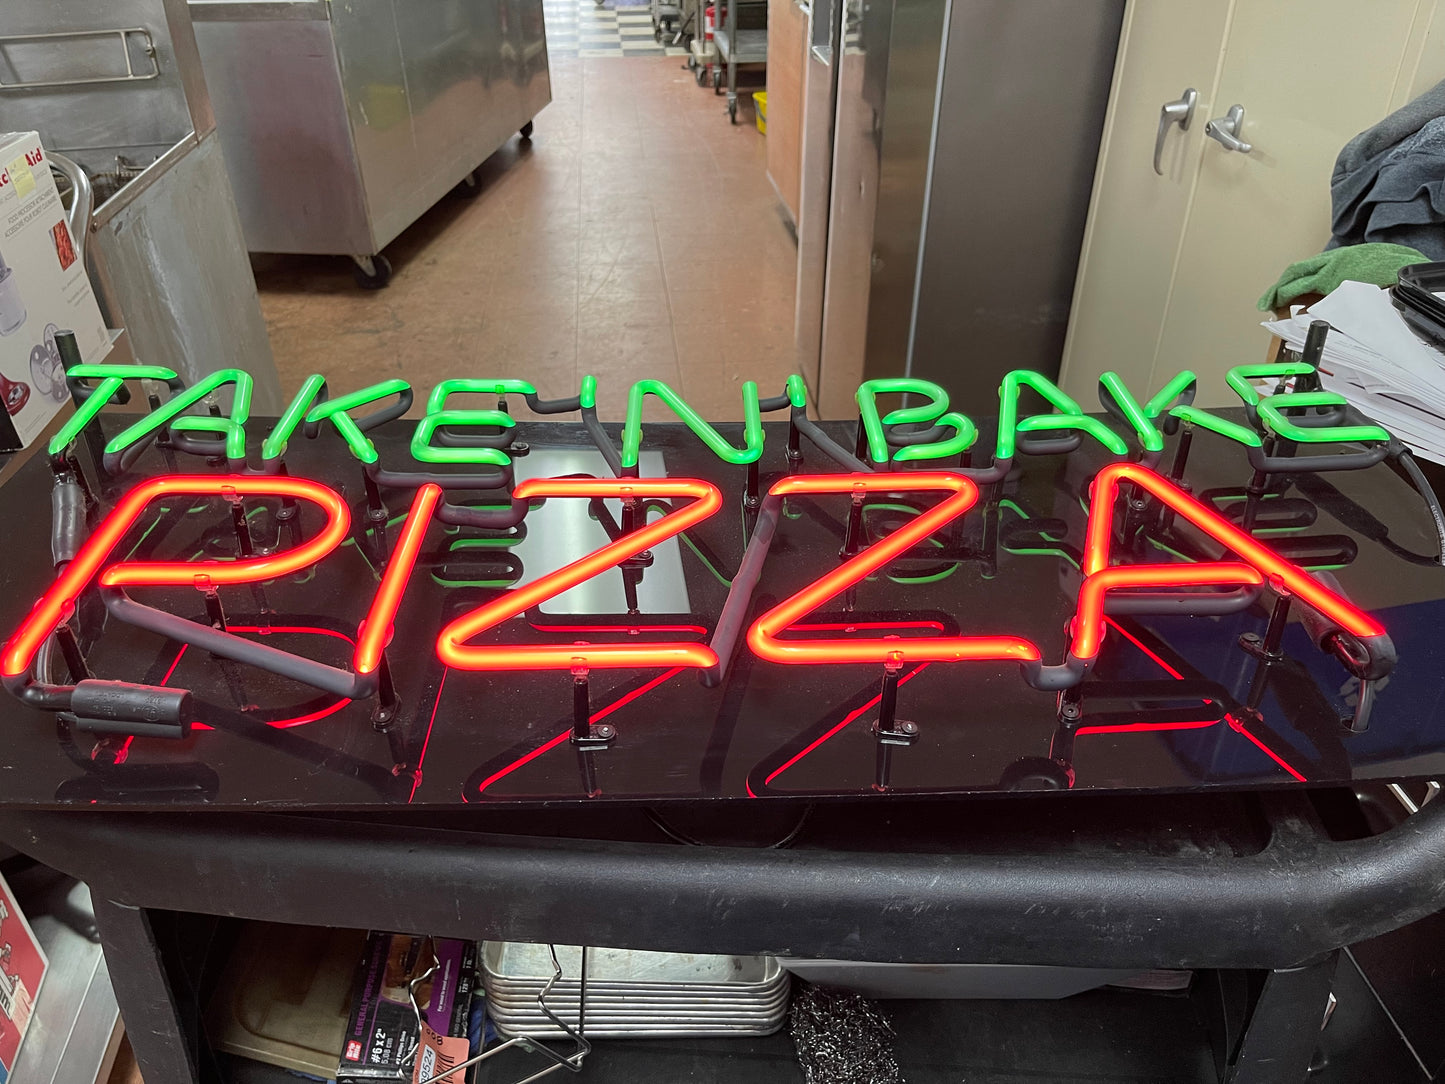 Take N Bake Pizza Green and Red Neon Sign